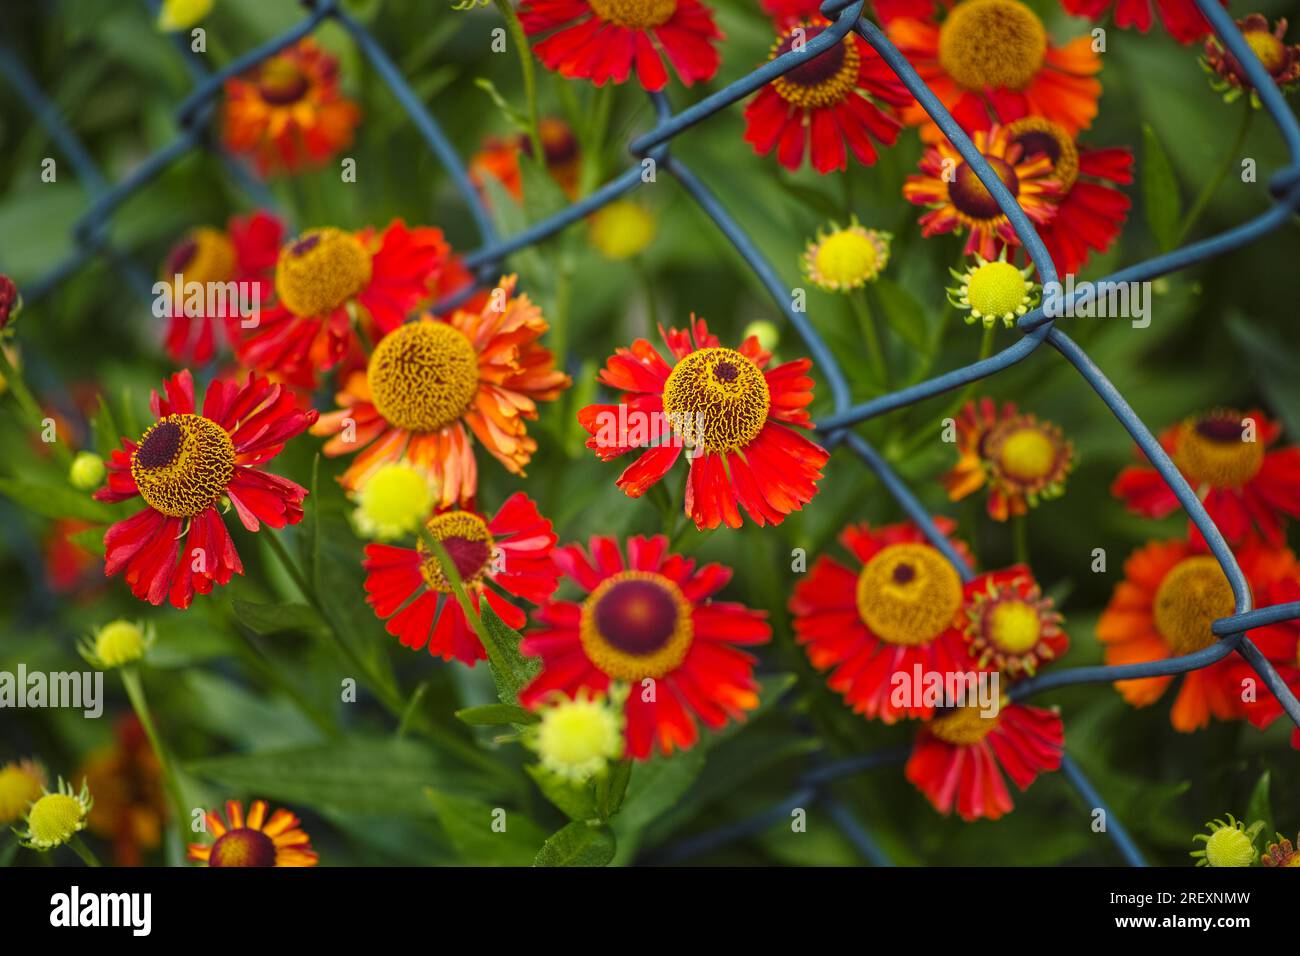 Red Helenium autumnales (common sneezeweed) flowering near a chain link fence Stock Photo